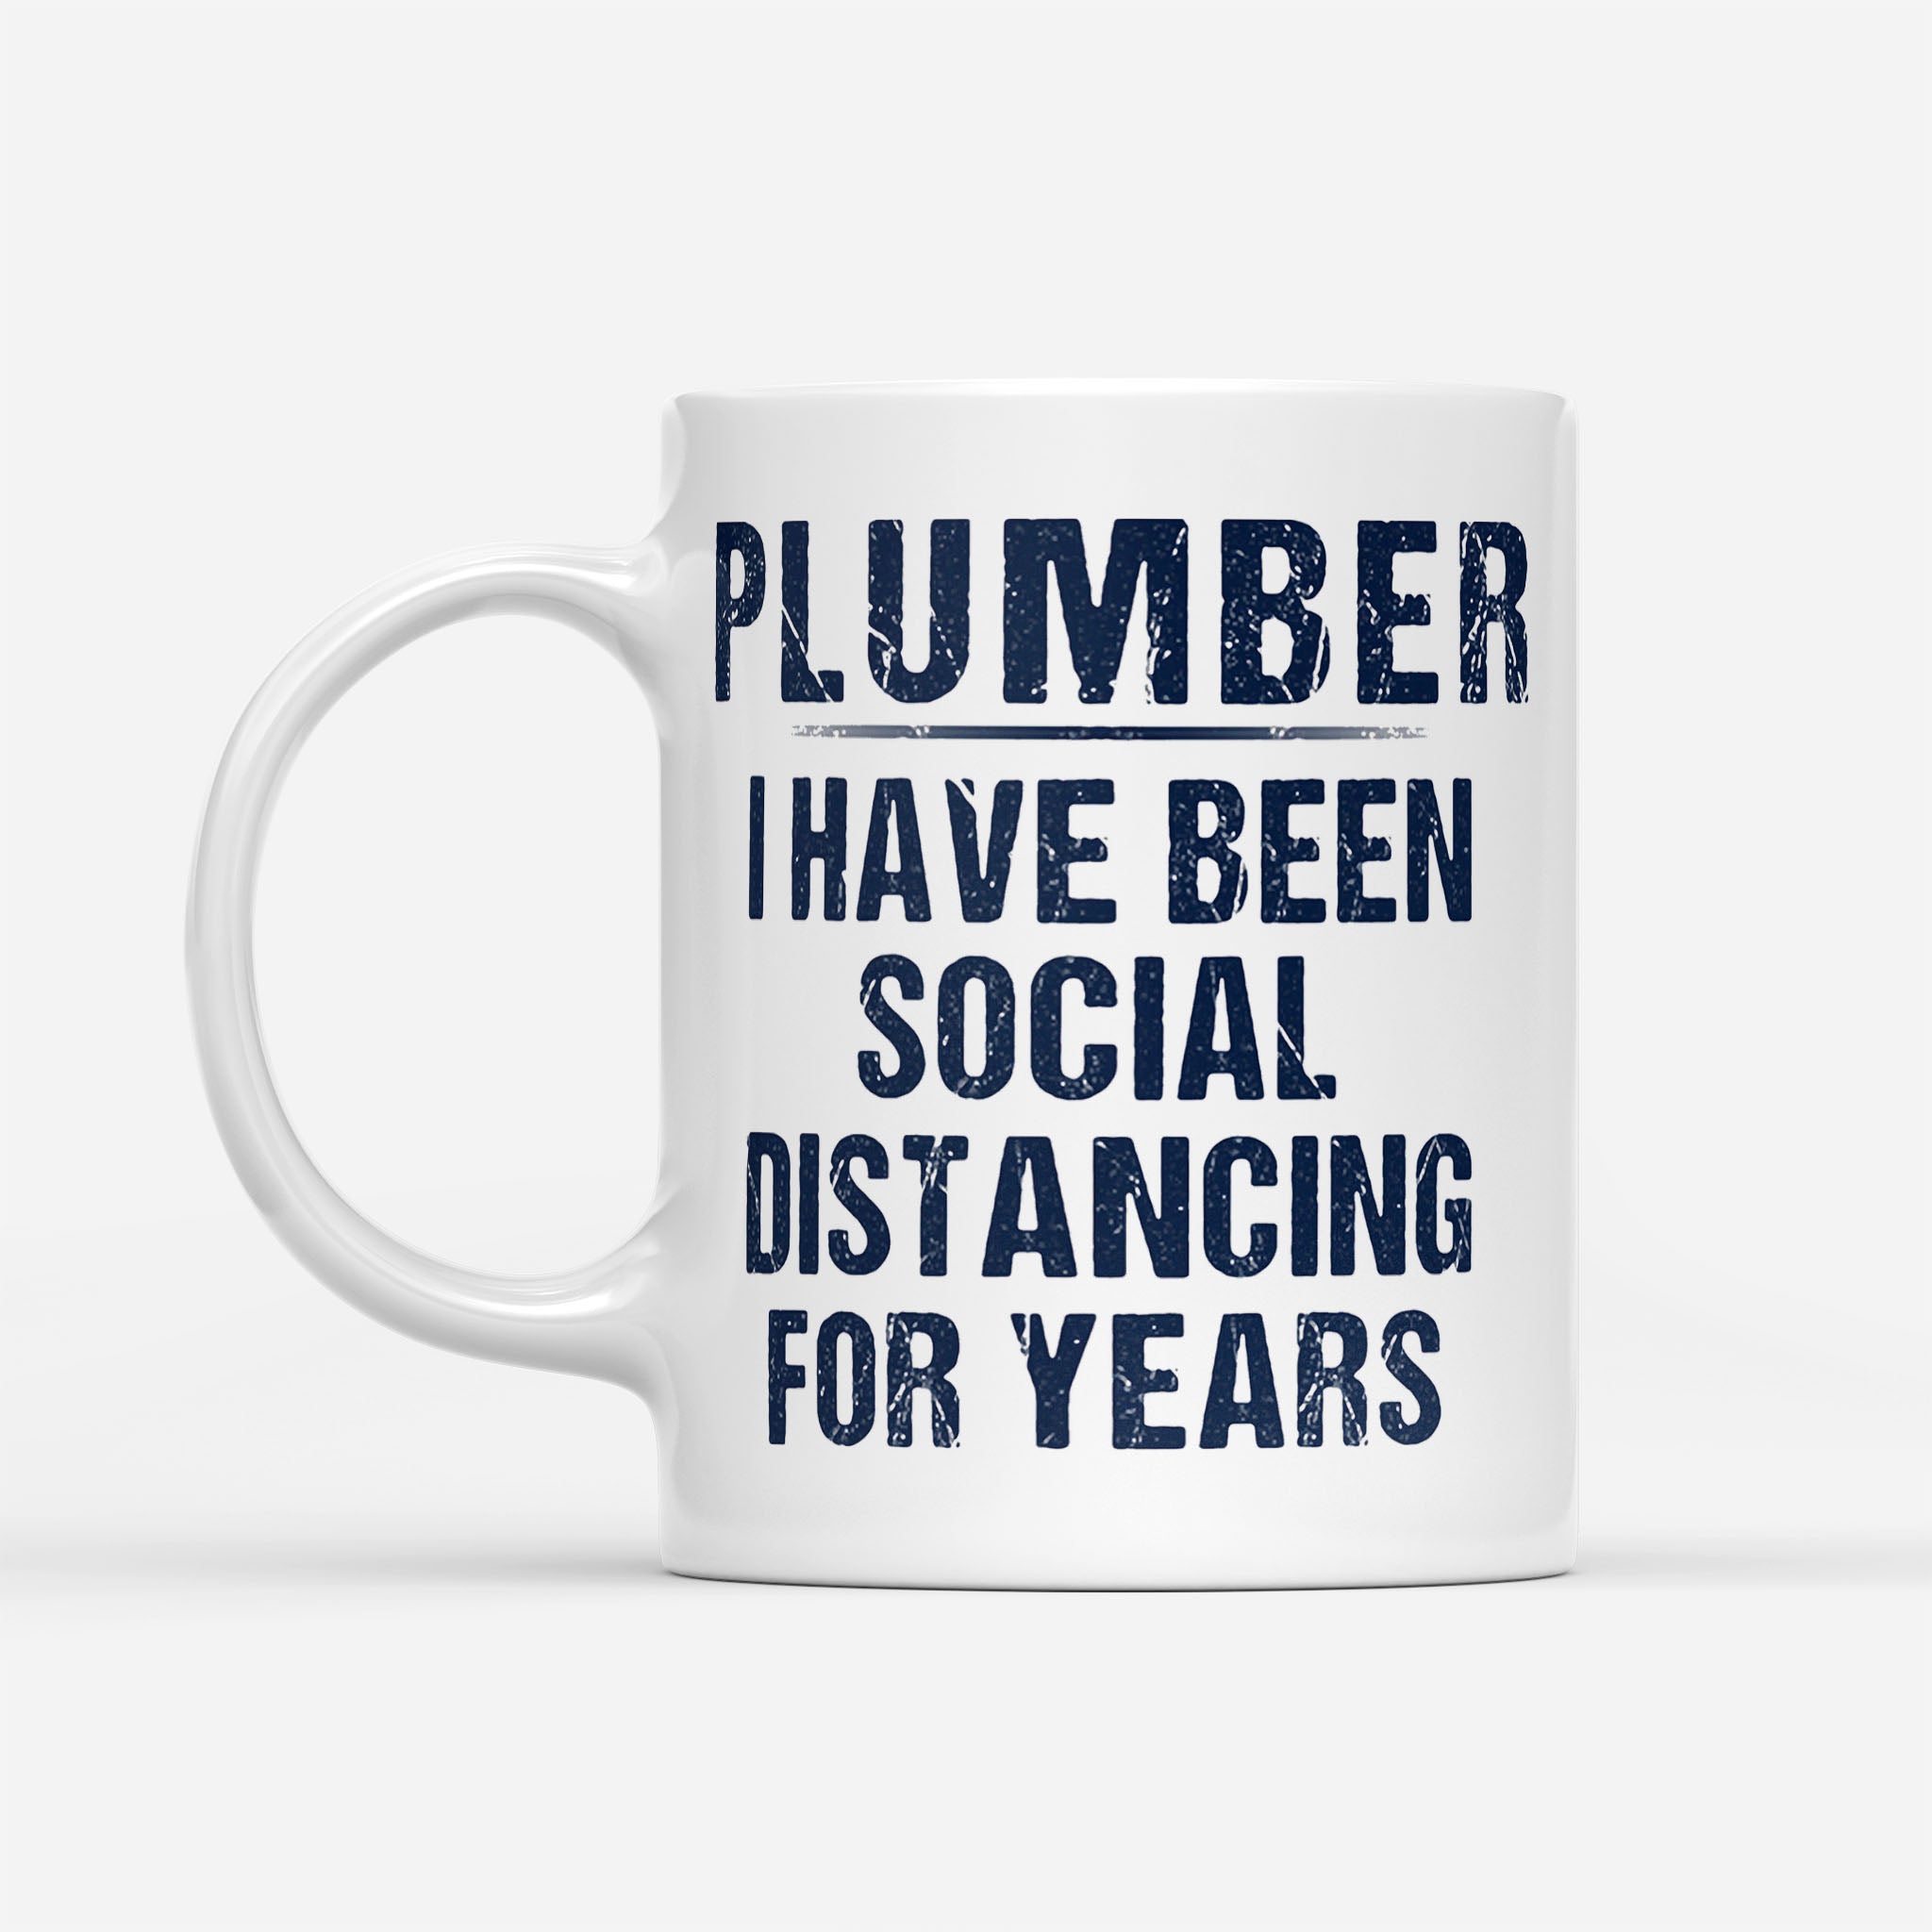 Plumber I Have Been Social Distancing For Years - White Mug